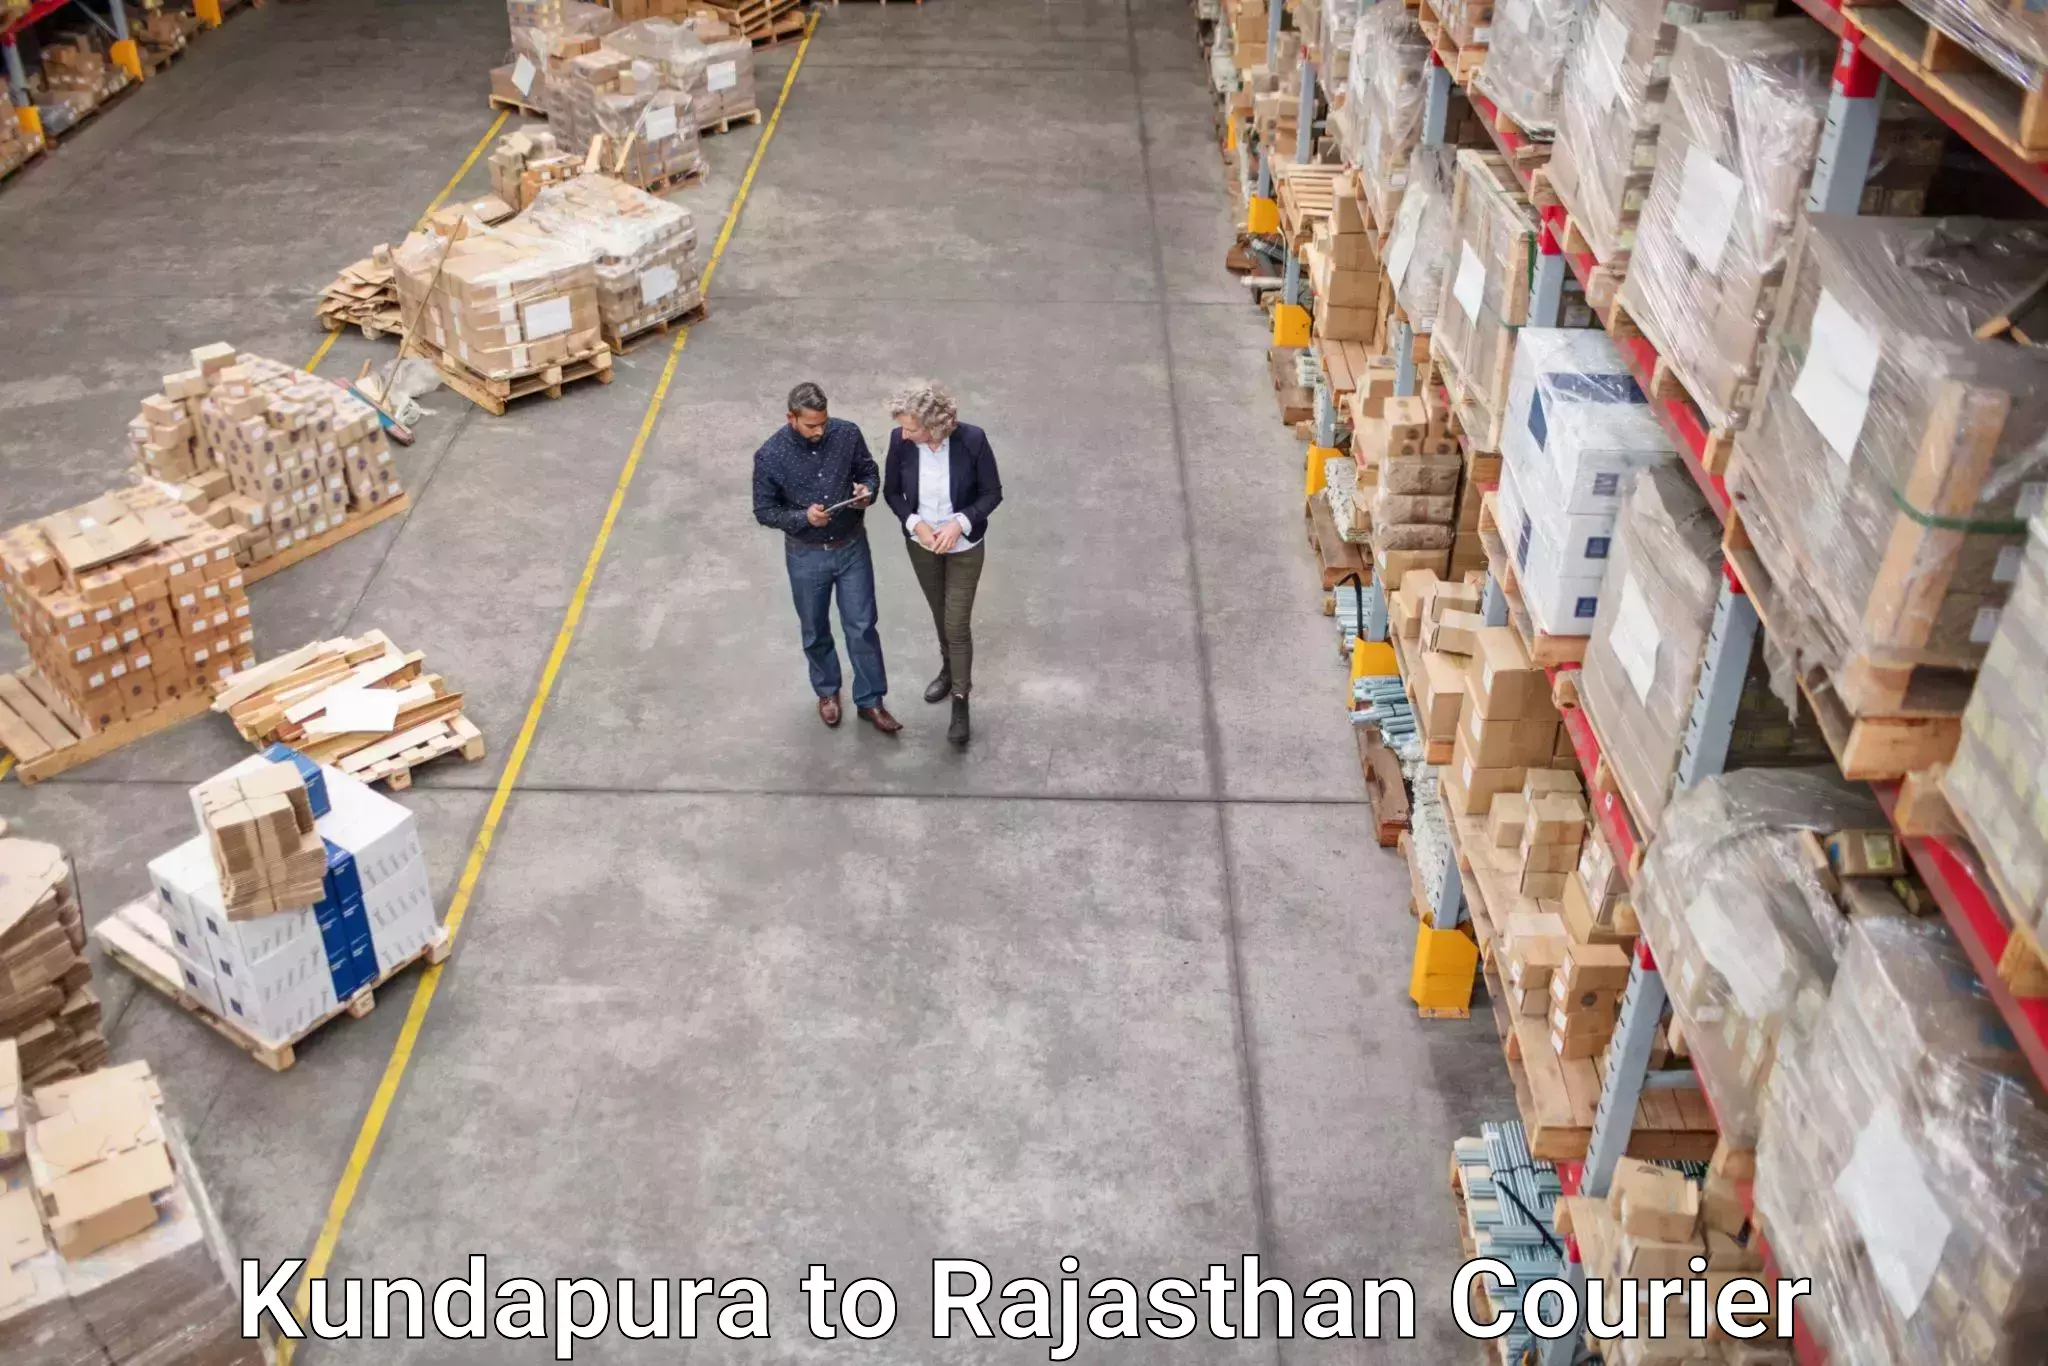 State-of-the-art courier technology Kundapura to Rajgarh Rajasthan